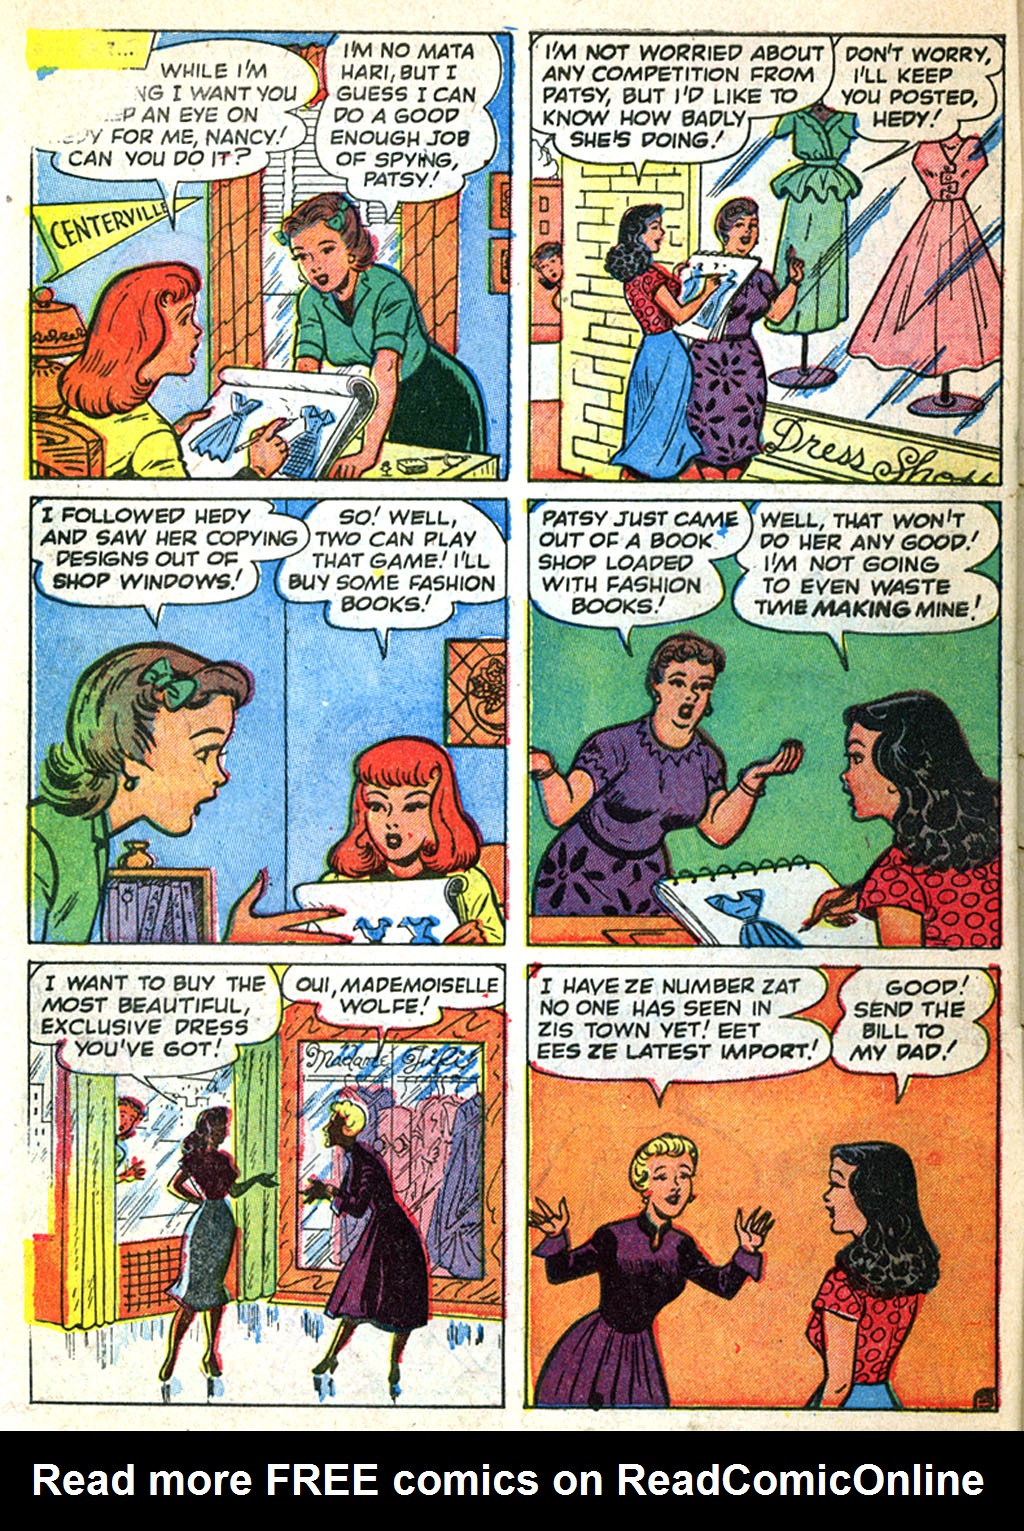 Read online Patsy and Hedy comic -  Issue #2 - 30